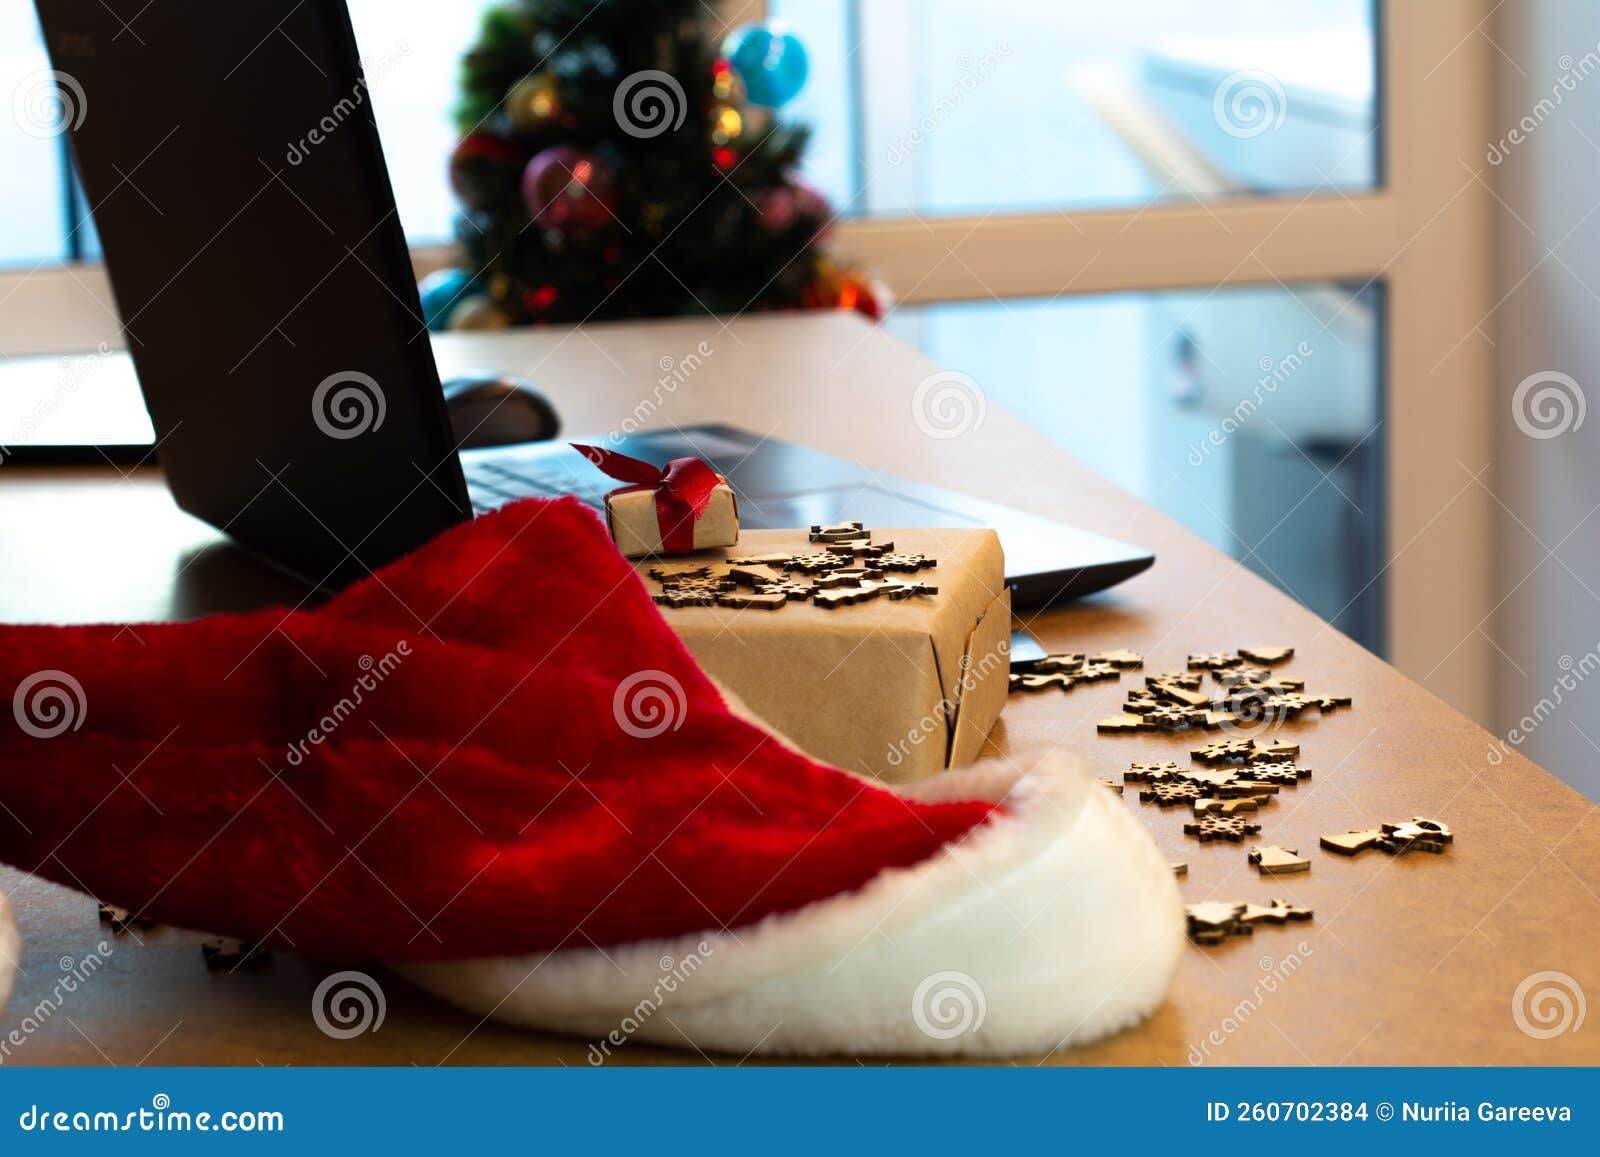 online shopping at christmas, happy new year. santa`s hat, gifts, laptop, wallpaper, picture, postcard